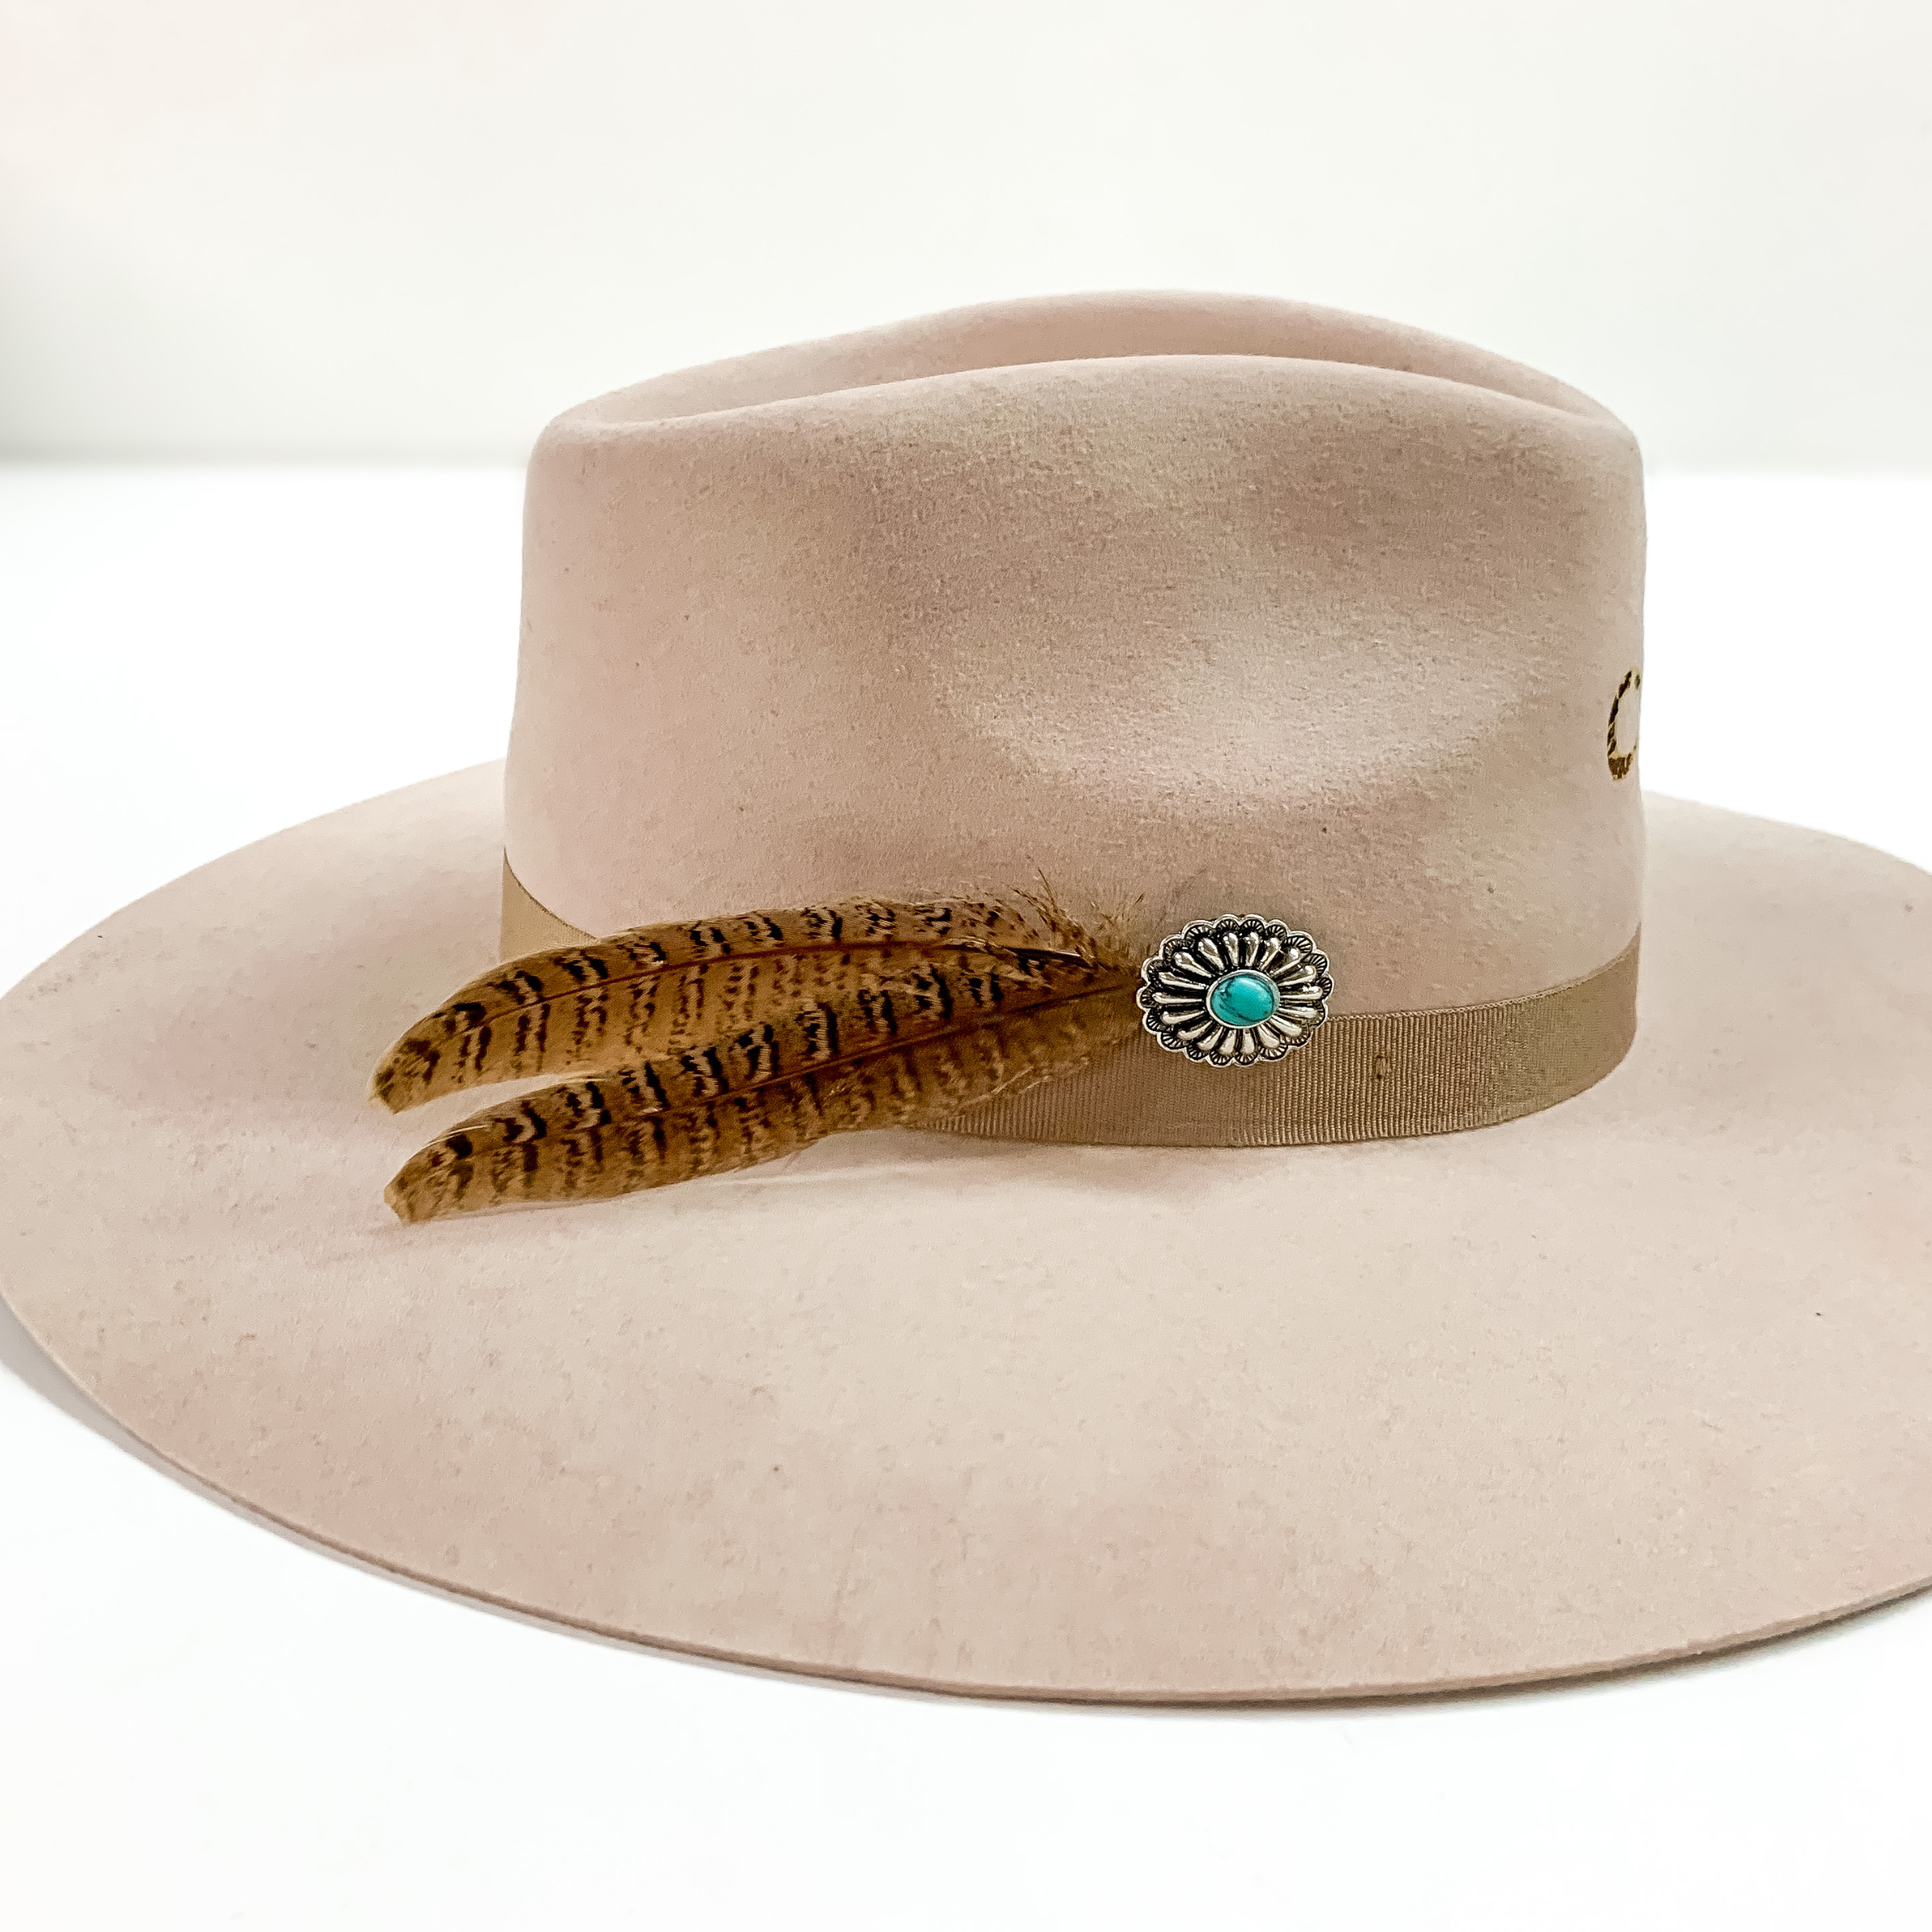 Silver Tone Oval Concho and Two Small Feathers Hat Pin with Turquoise Stone - Giddy Up Glamour Boutique